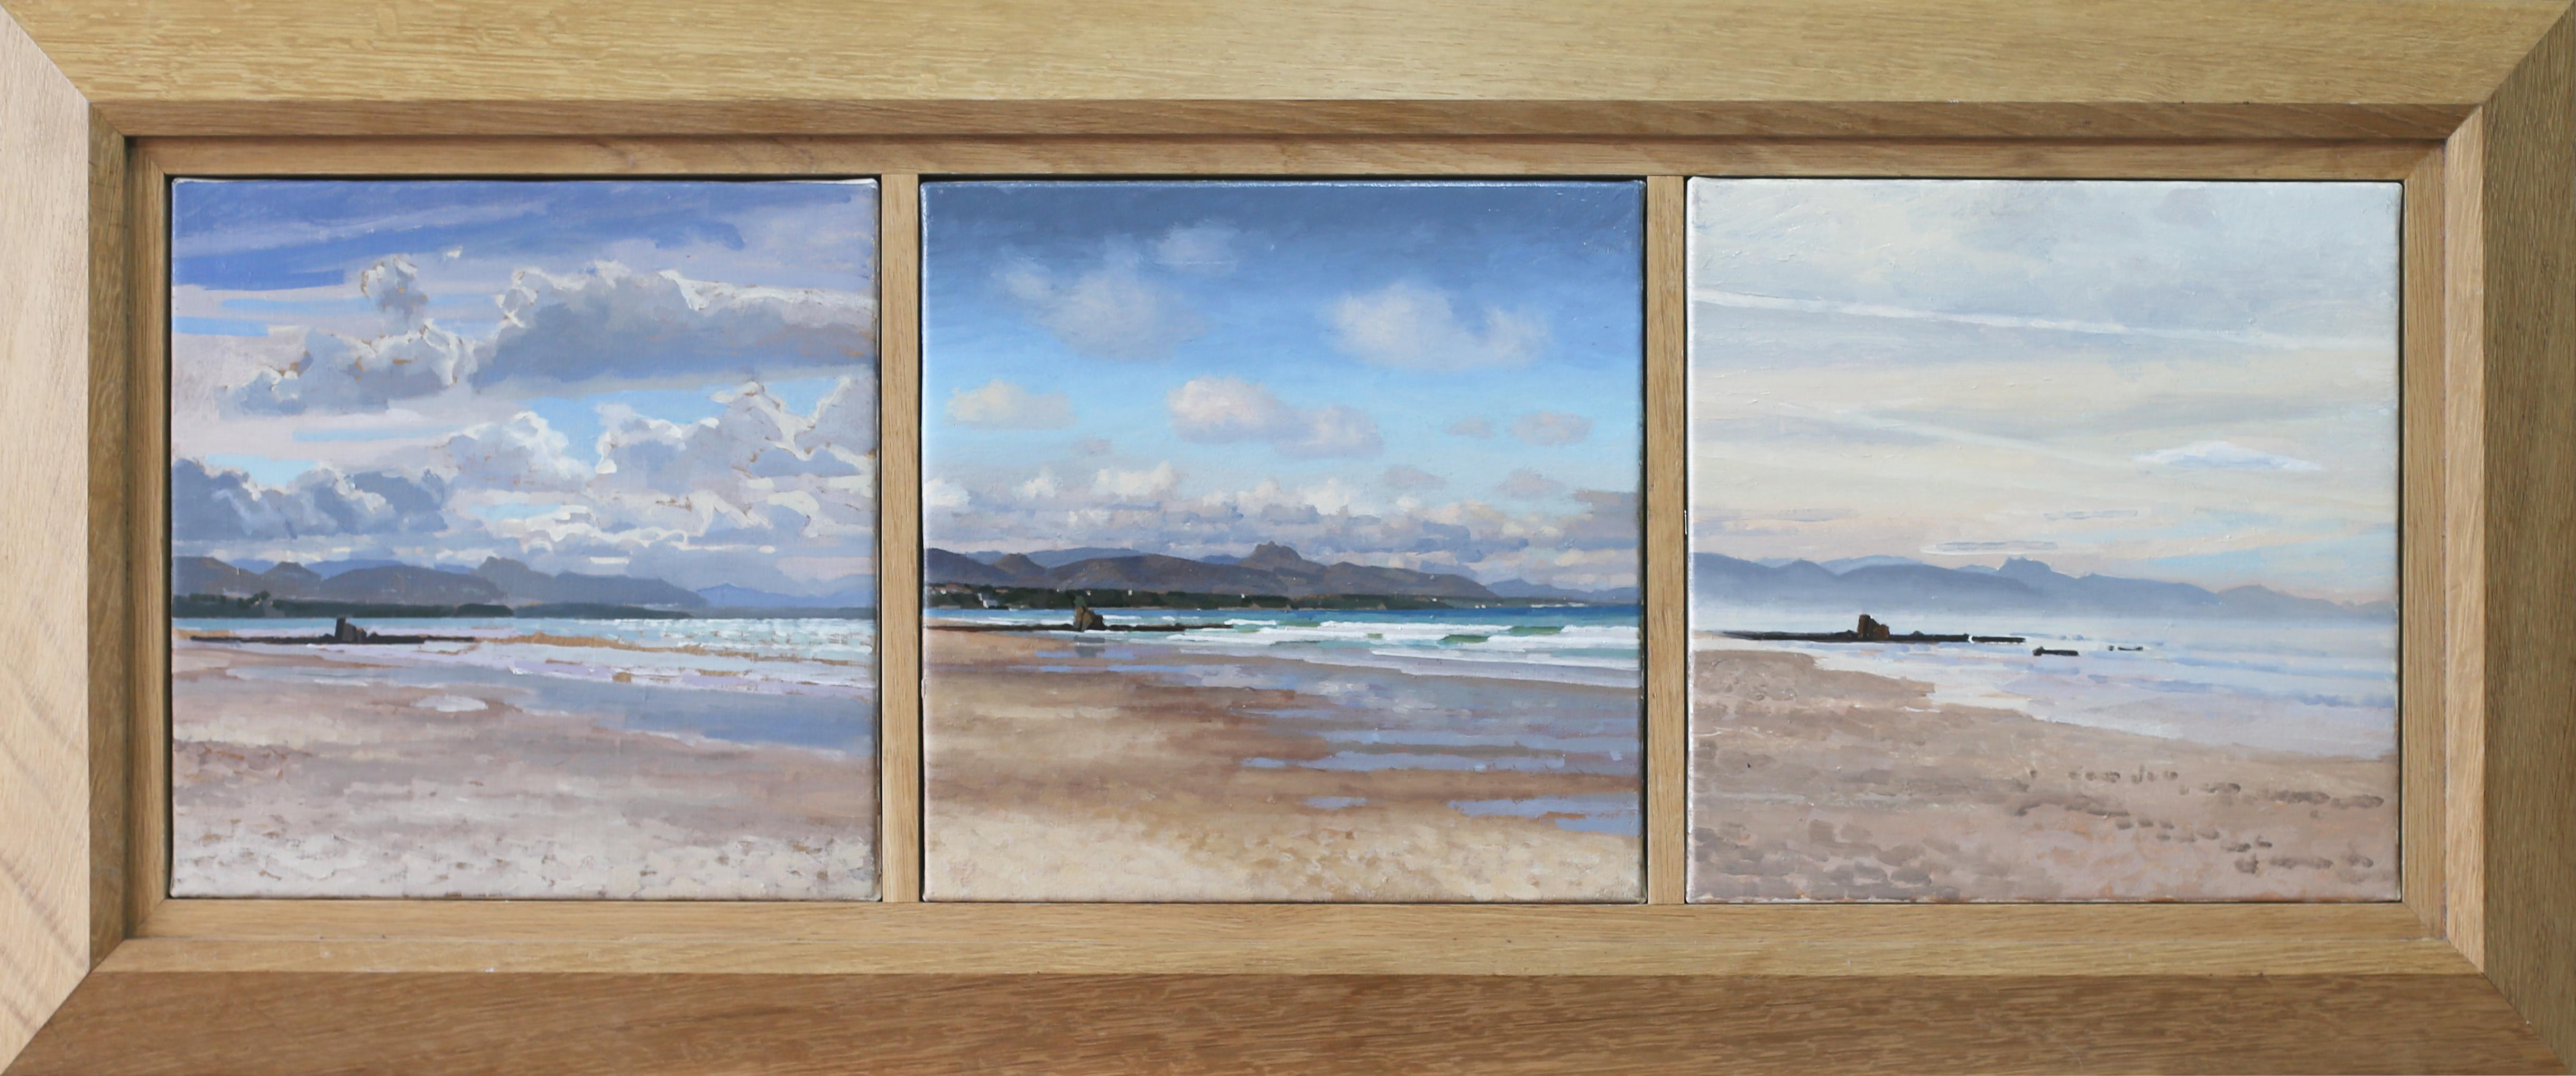 Didier LAPÈNE Landscape Painting - The three Crowns, Biarritz, Basque country - Tryptic